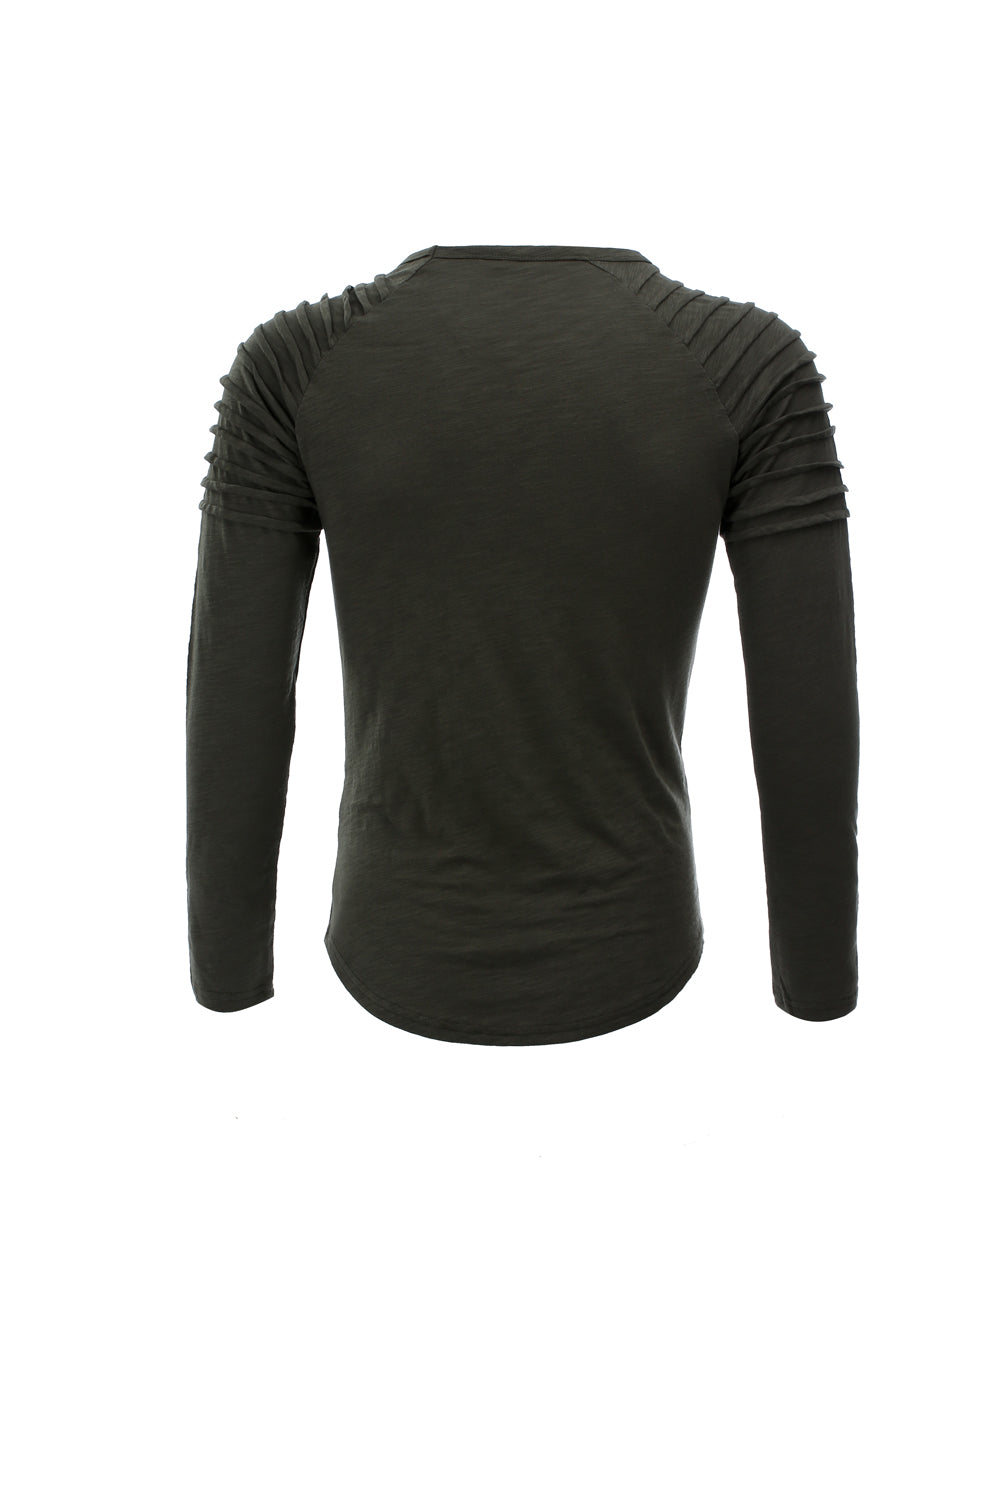 Round Neck Solid Color Long Sleeve T-Shirt